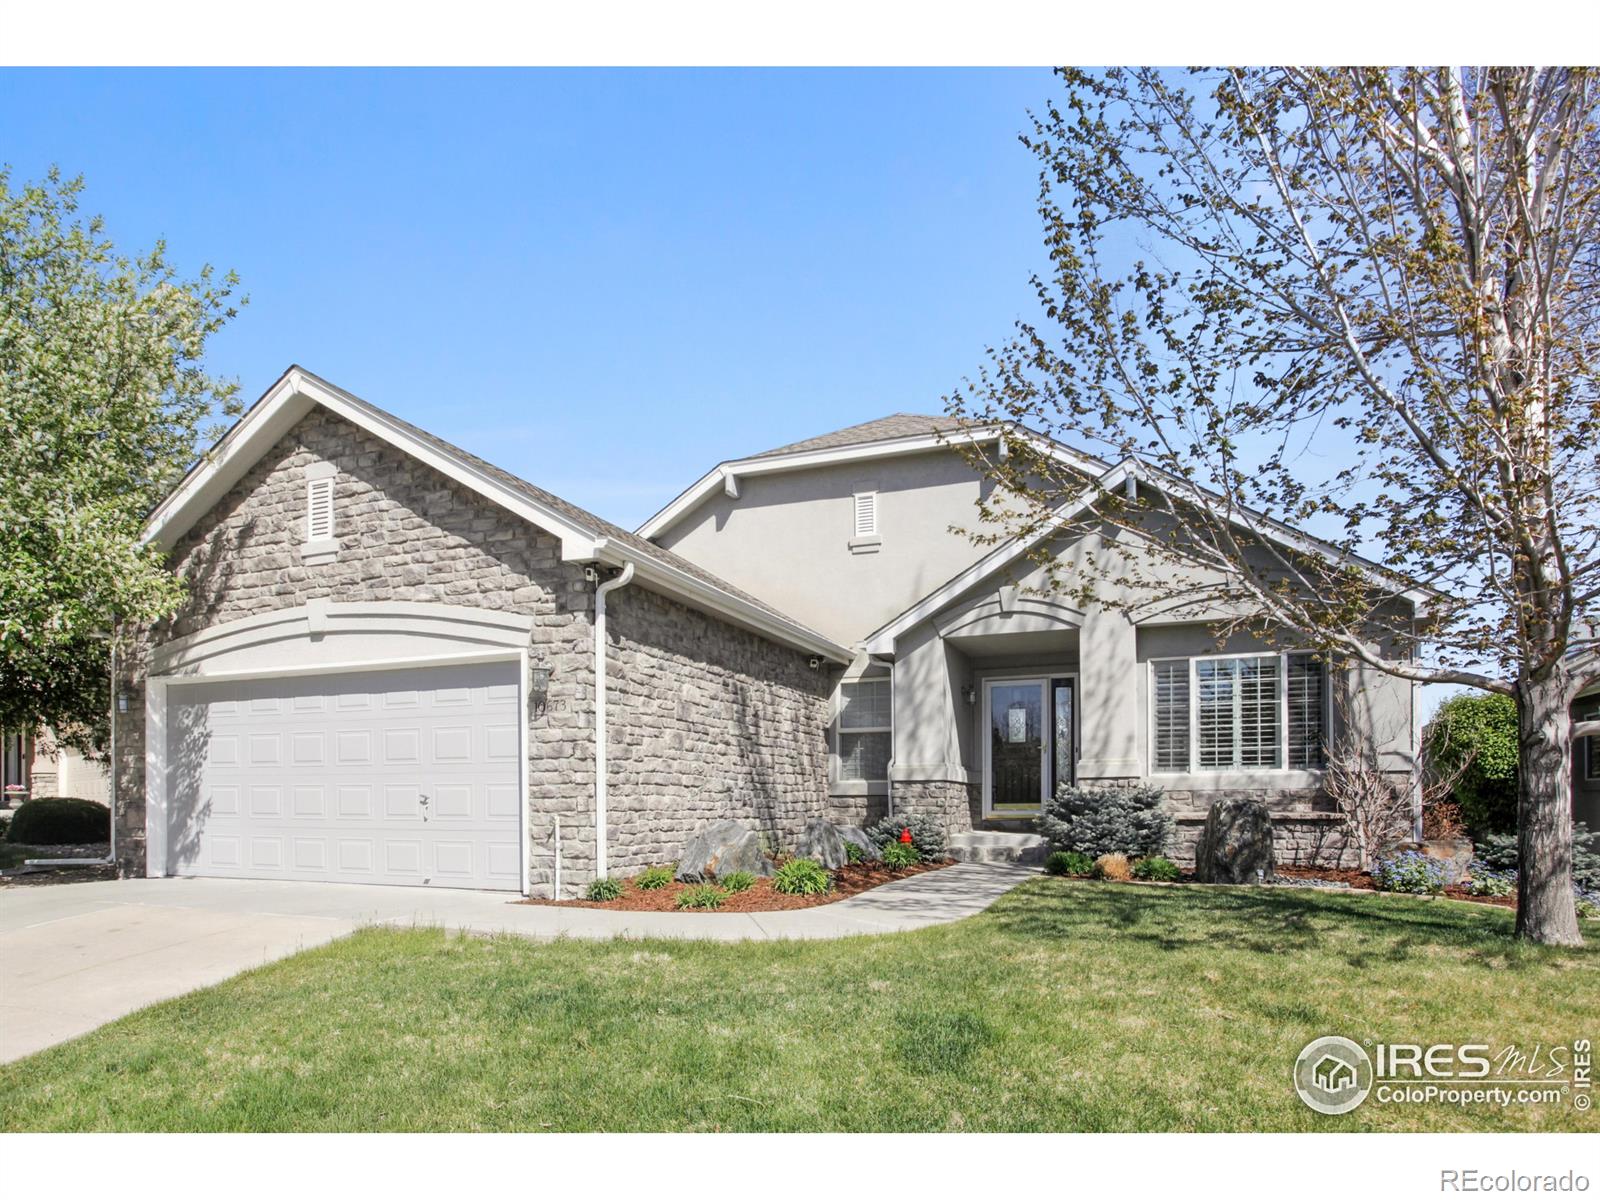 Report Image for 10673 N Osceola Drive,Westminster, Colorado